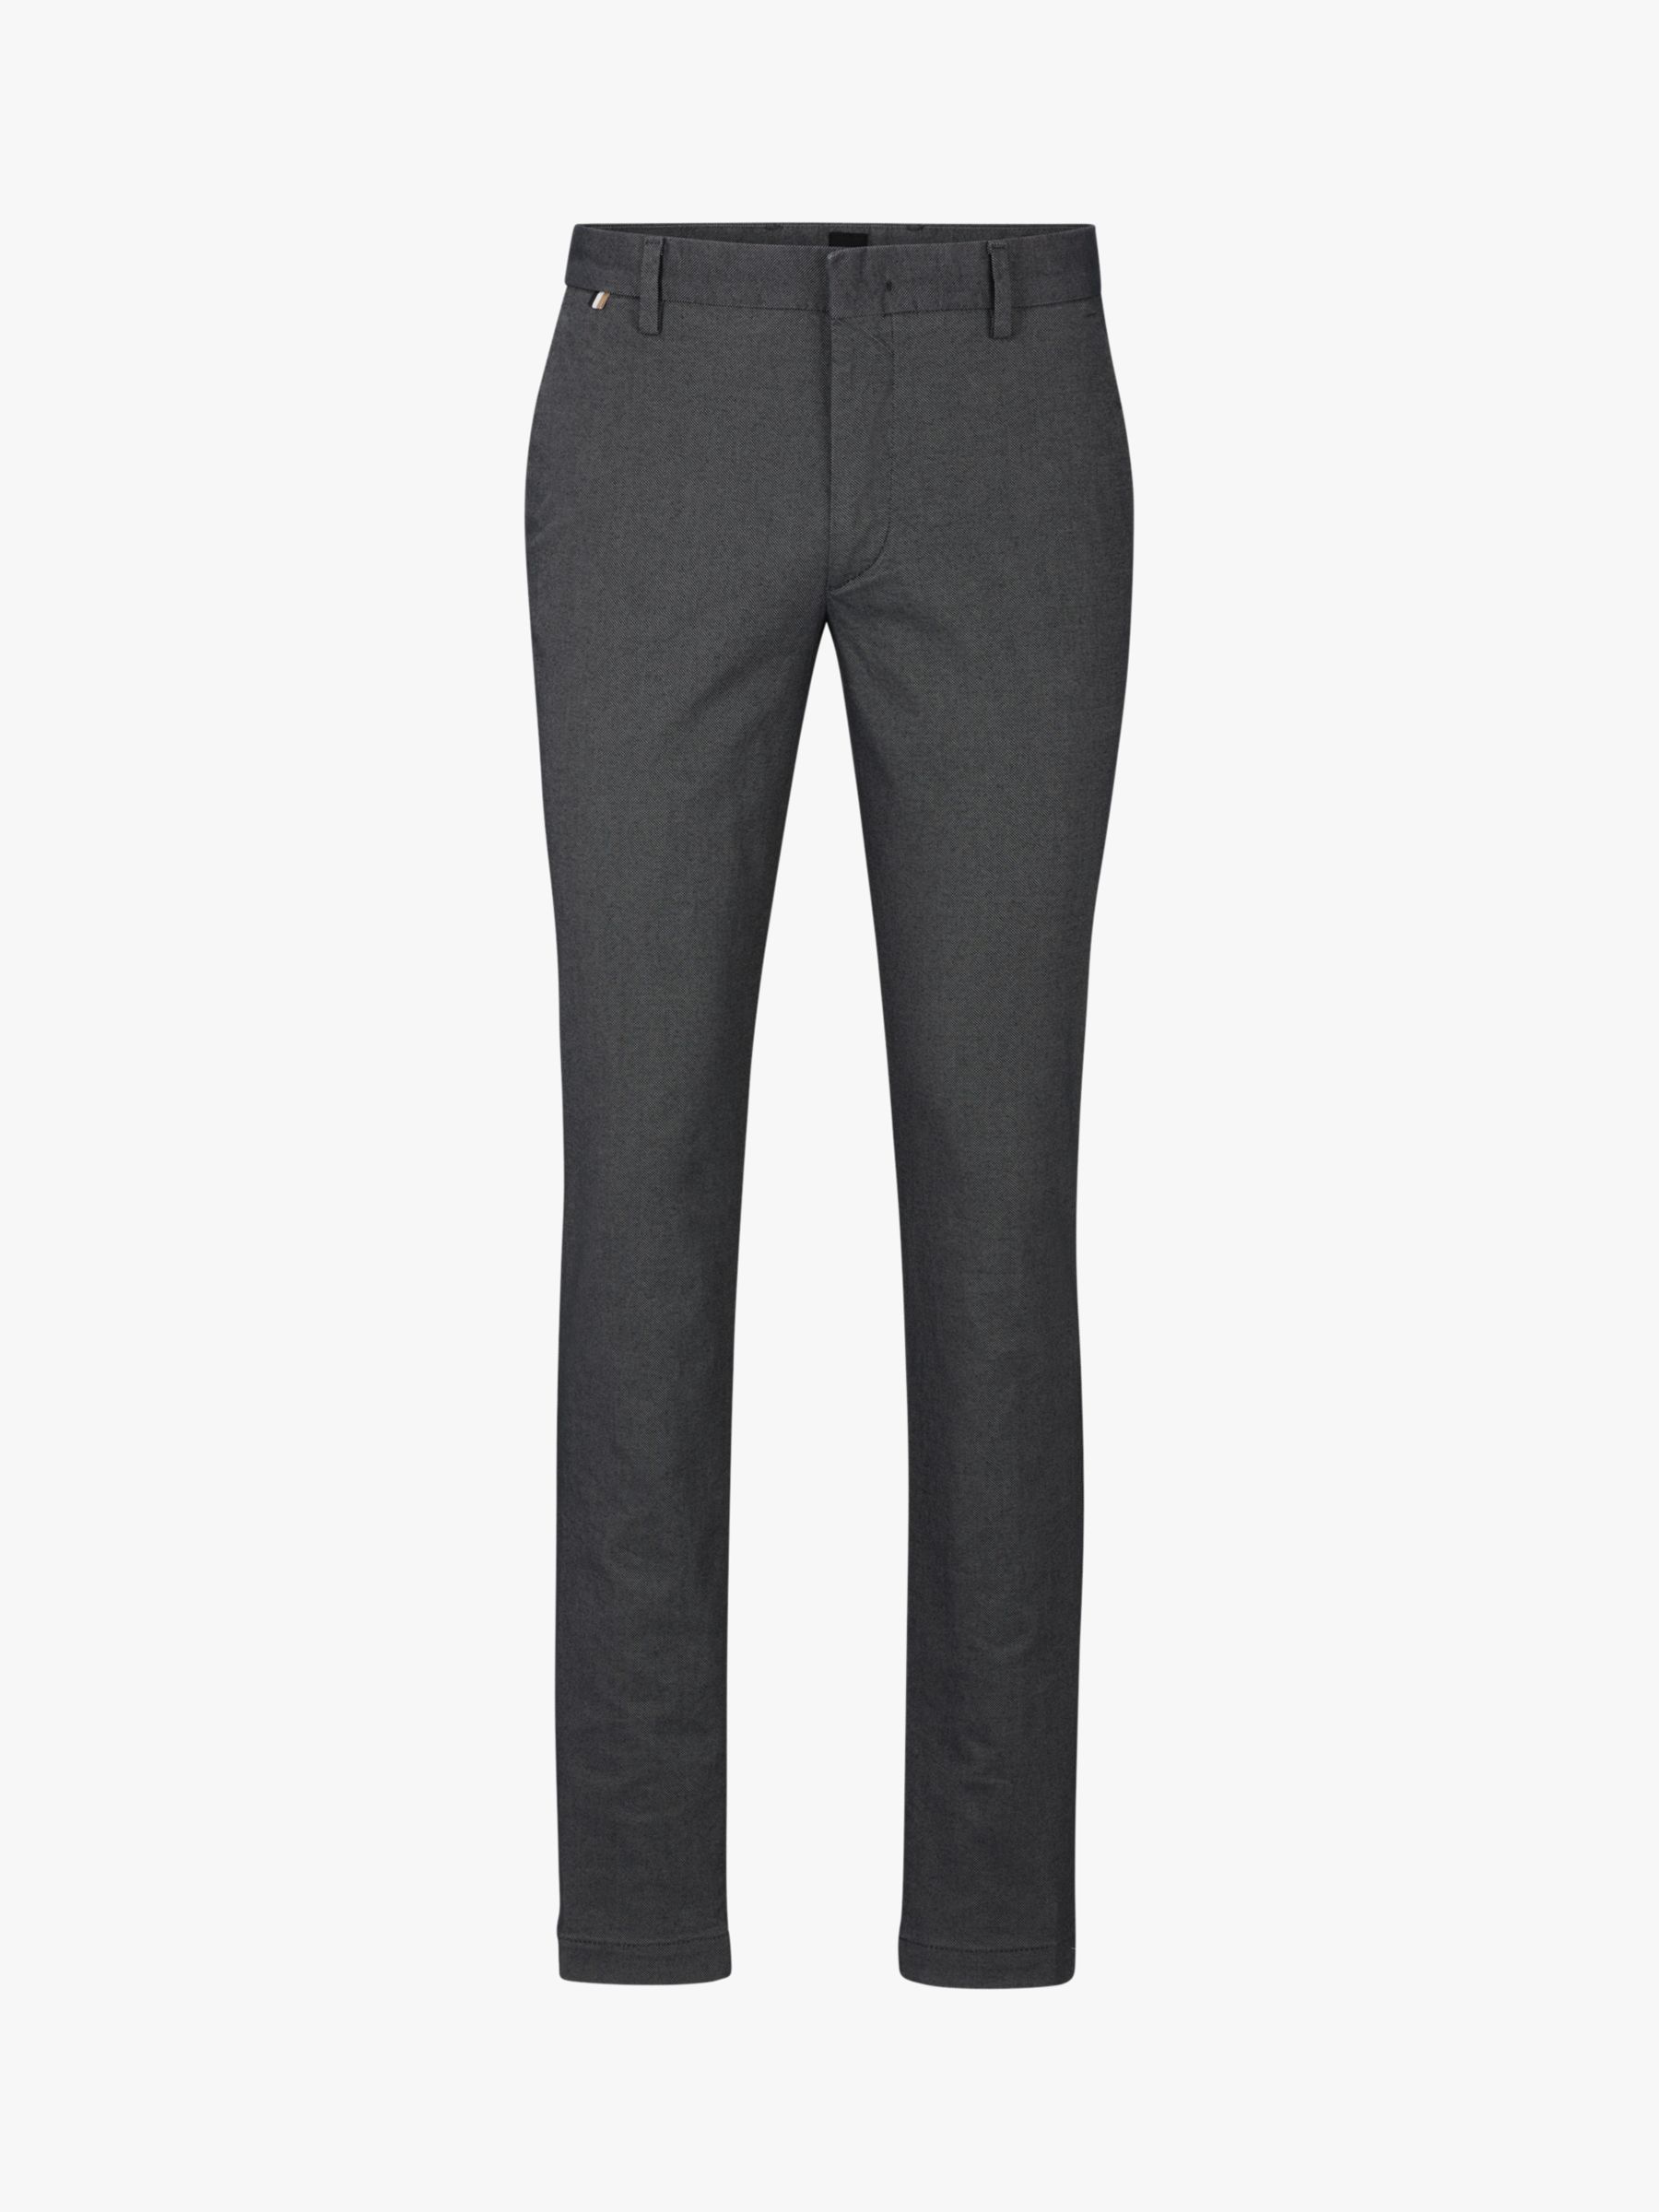 BOSS Kaito Slim Fit Trousers, Silver at John Lewis & Partners